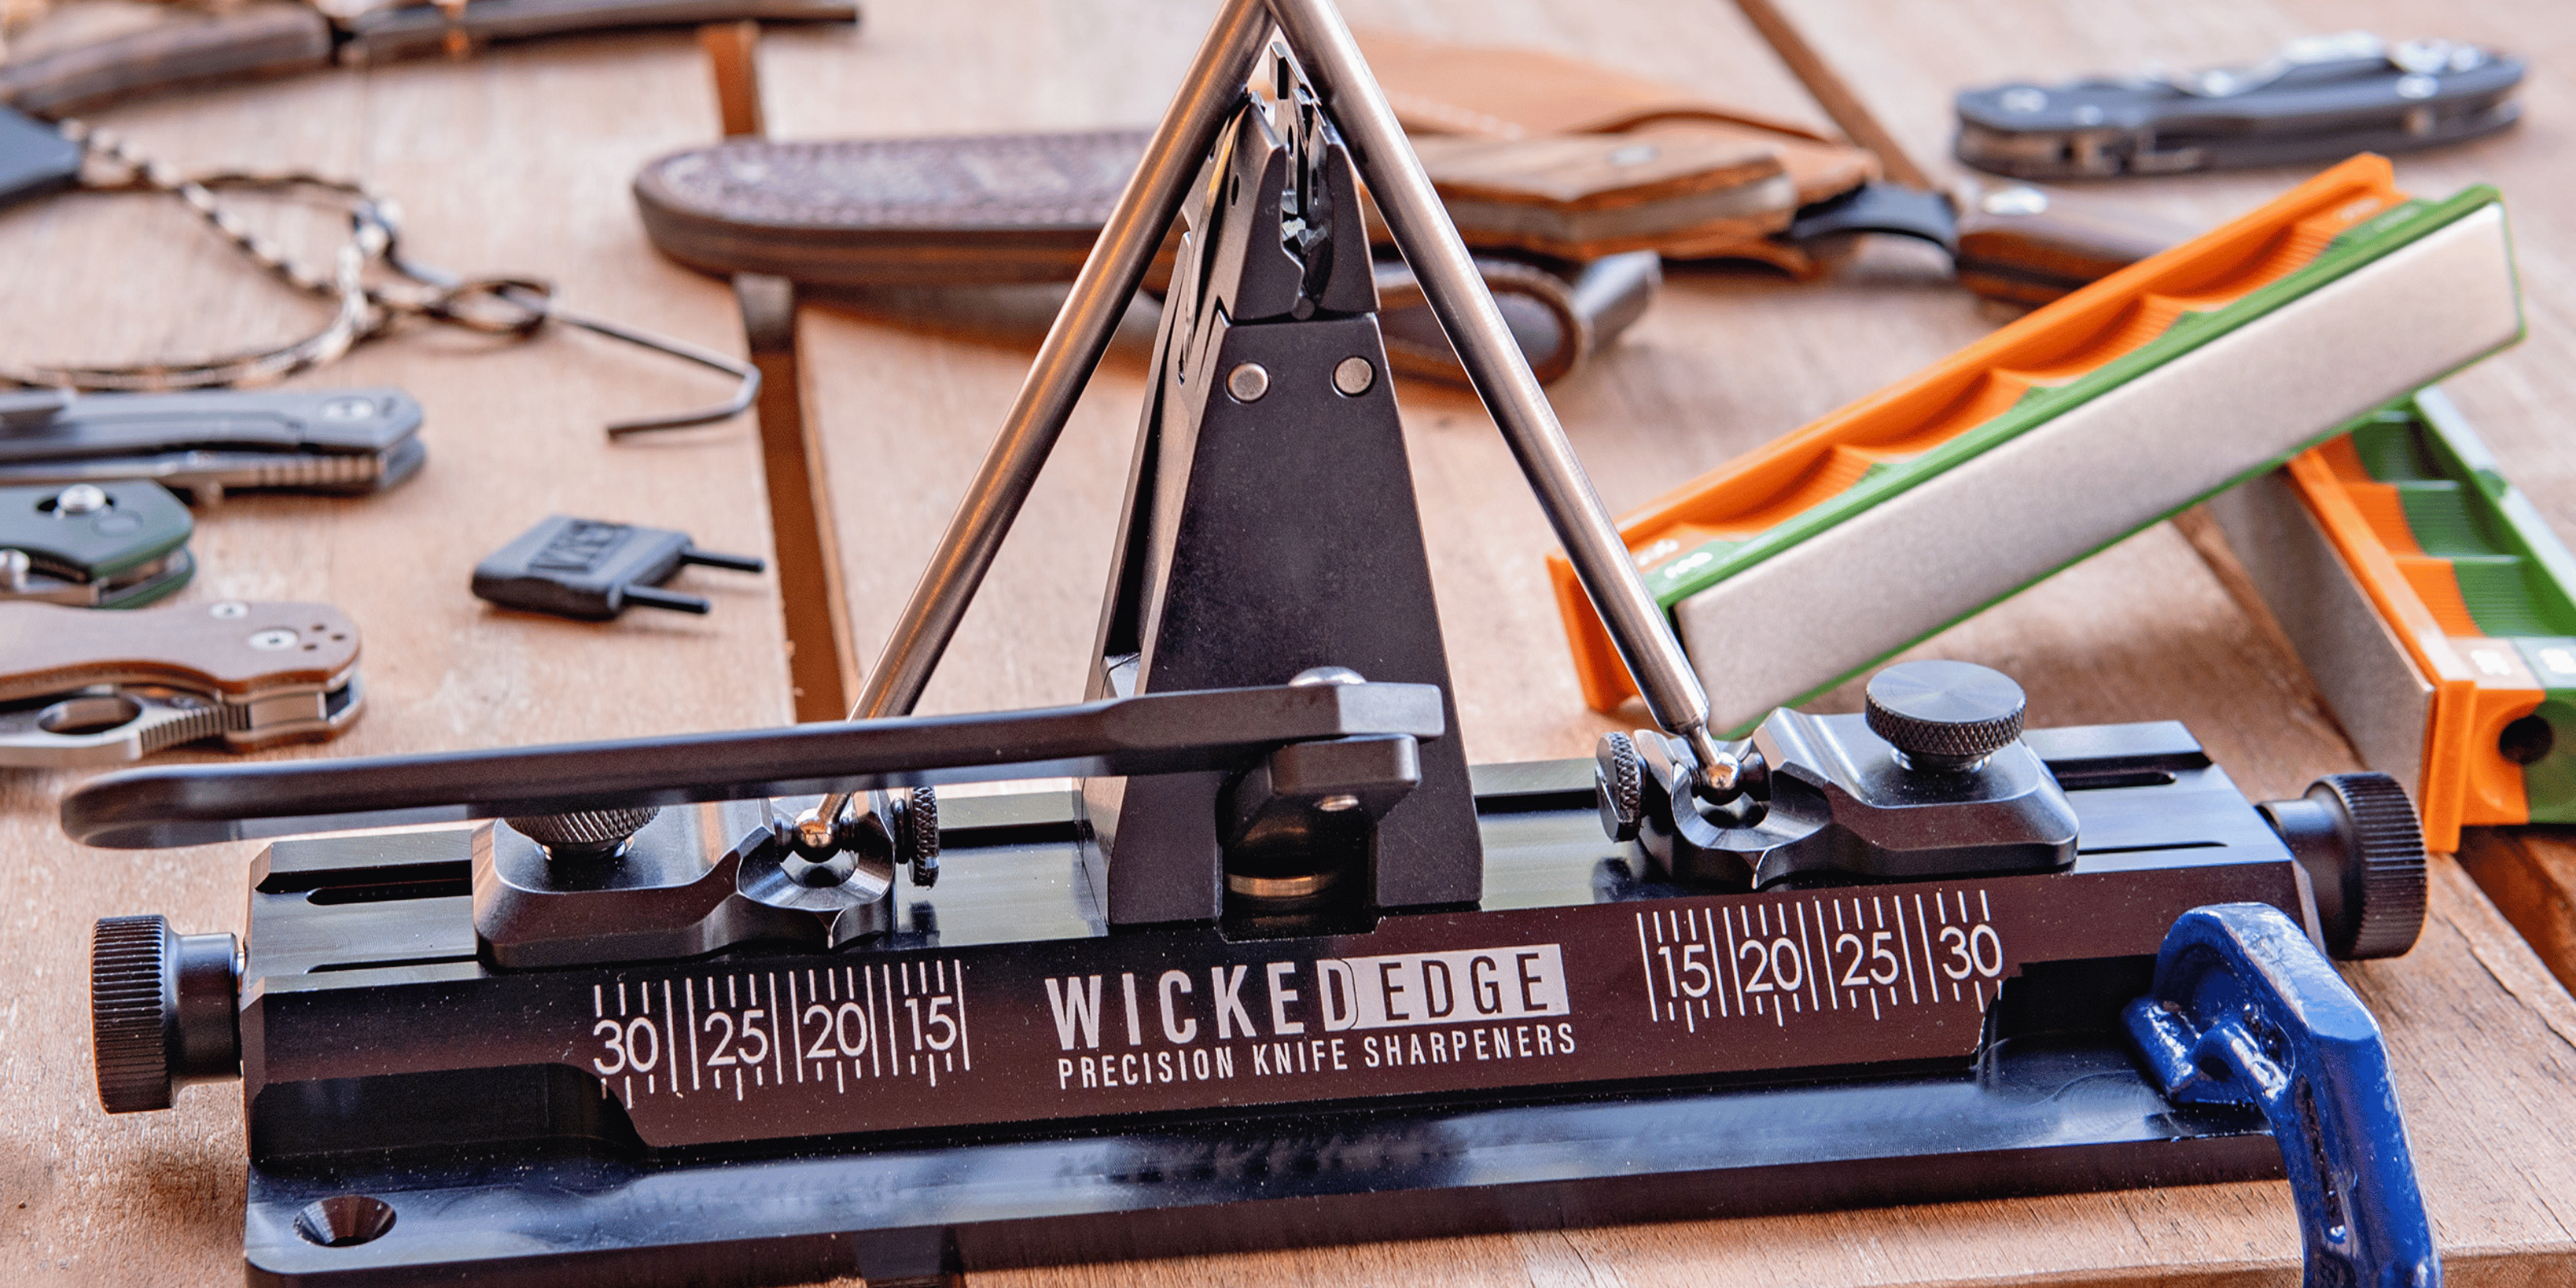 Edge-On-Up Professional Edge Tester – Wicked Edge Precision Knife